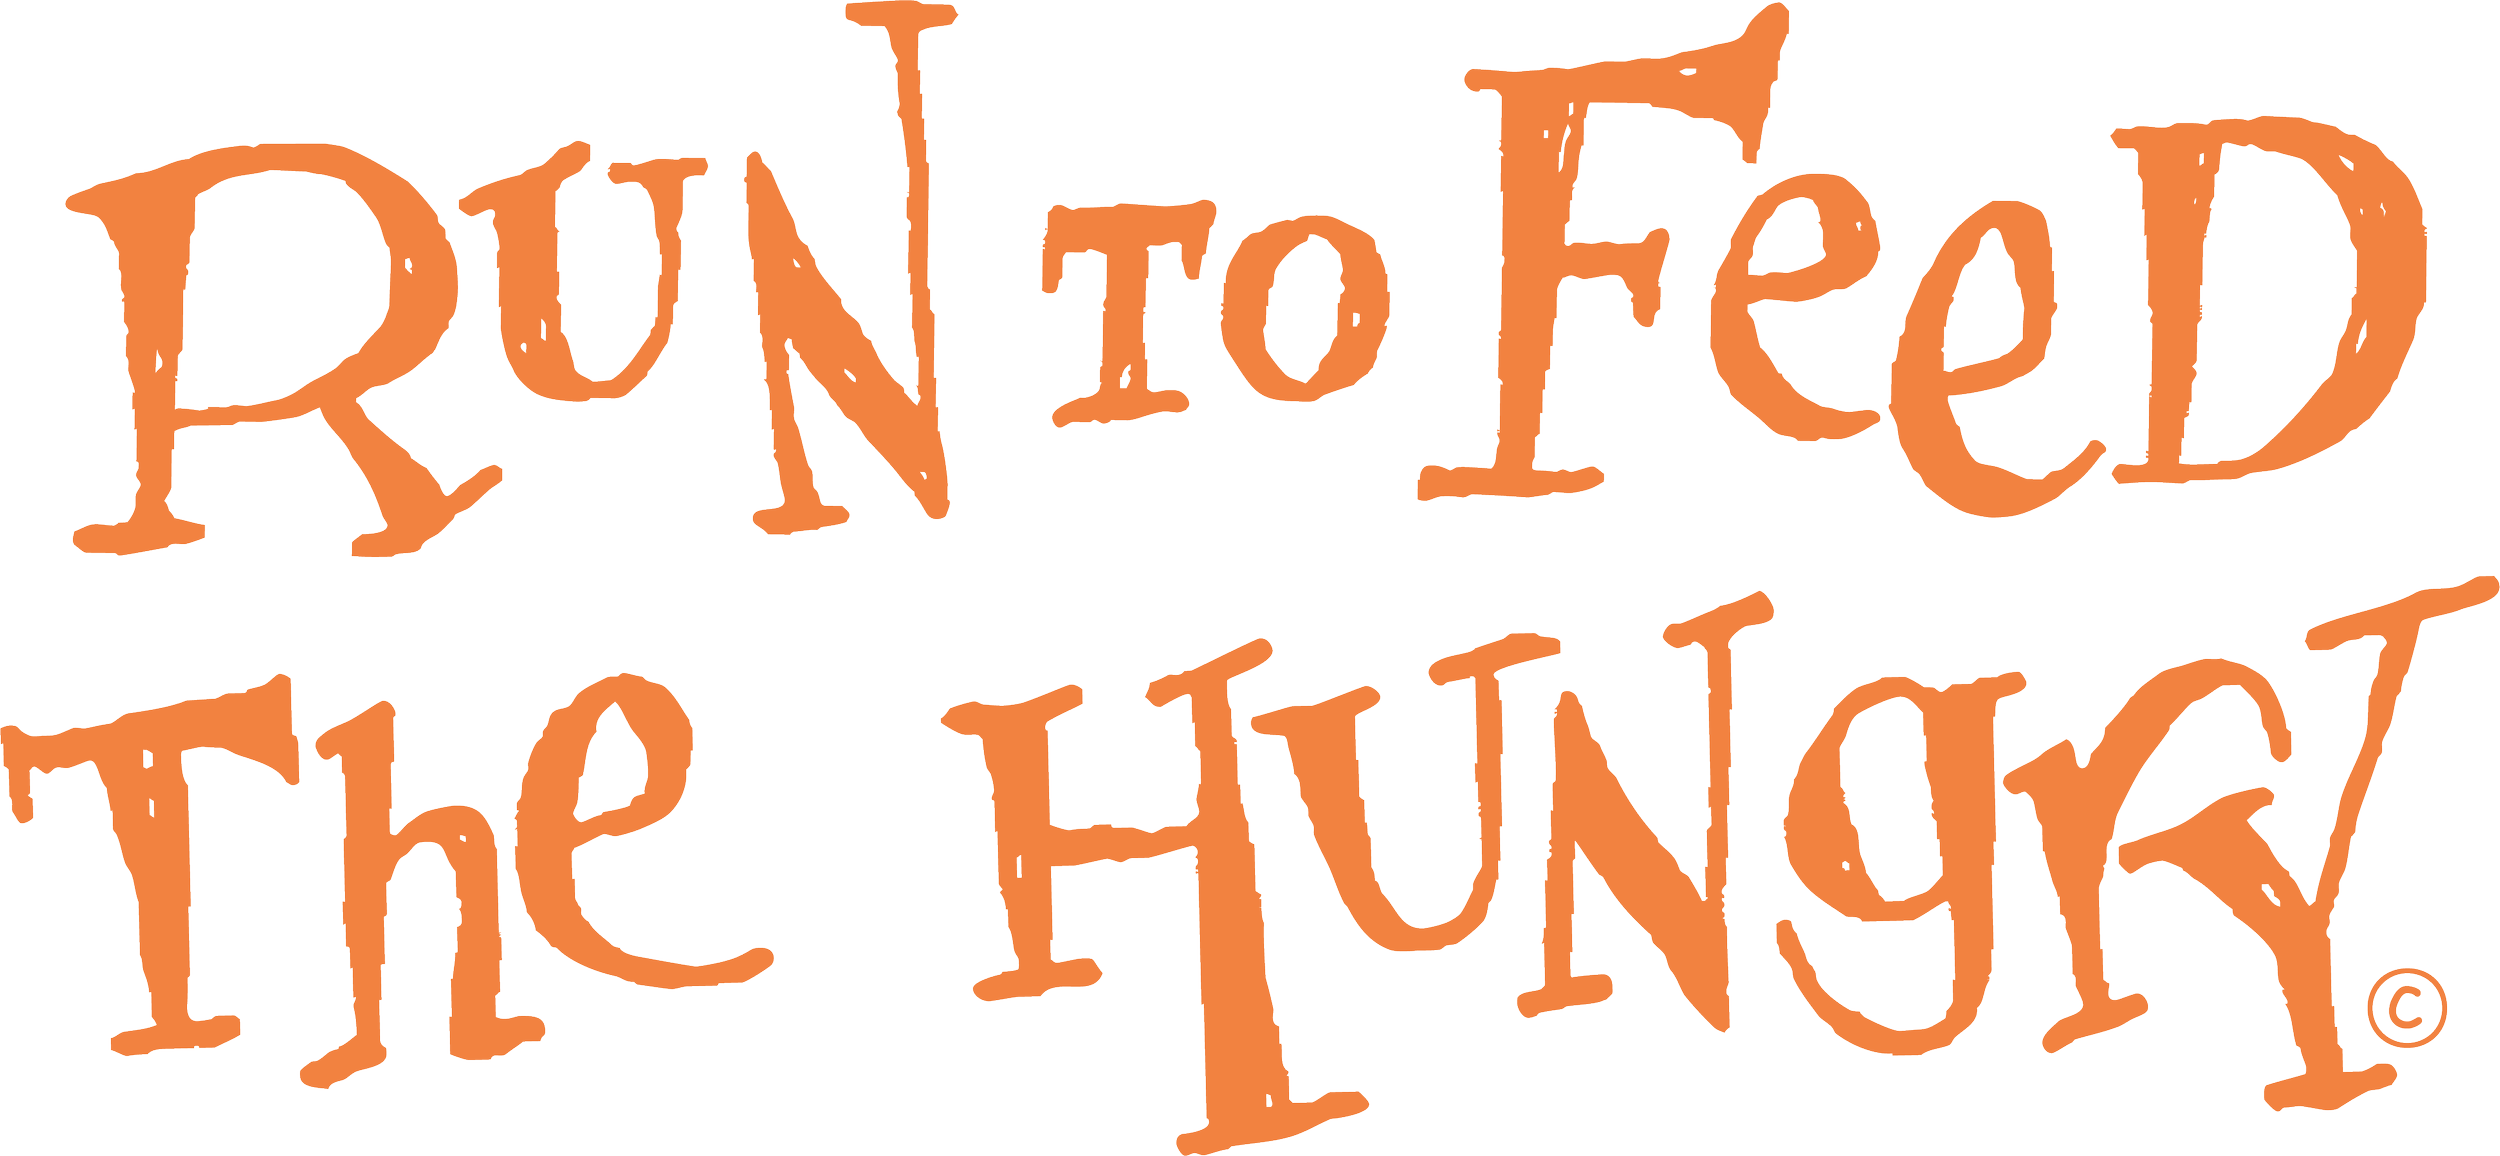 Run to Feed the Hungry